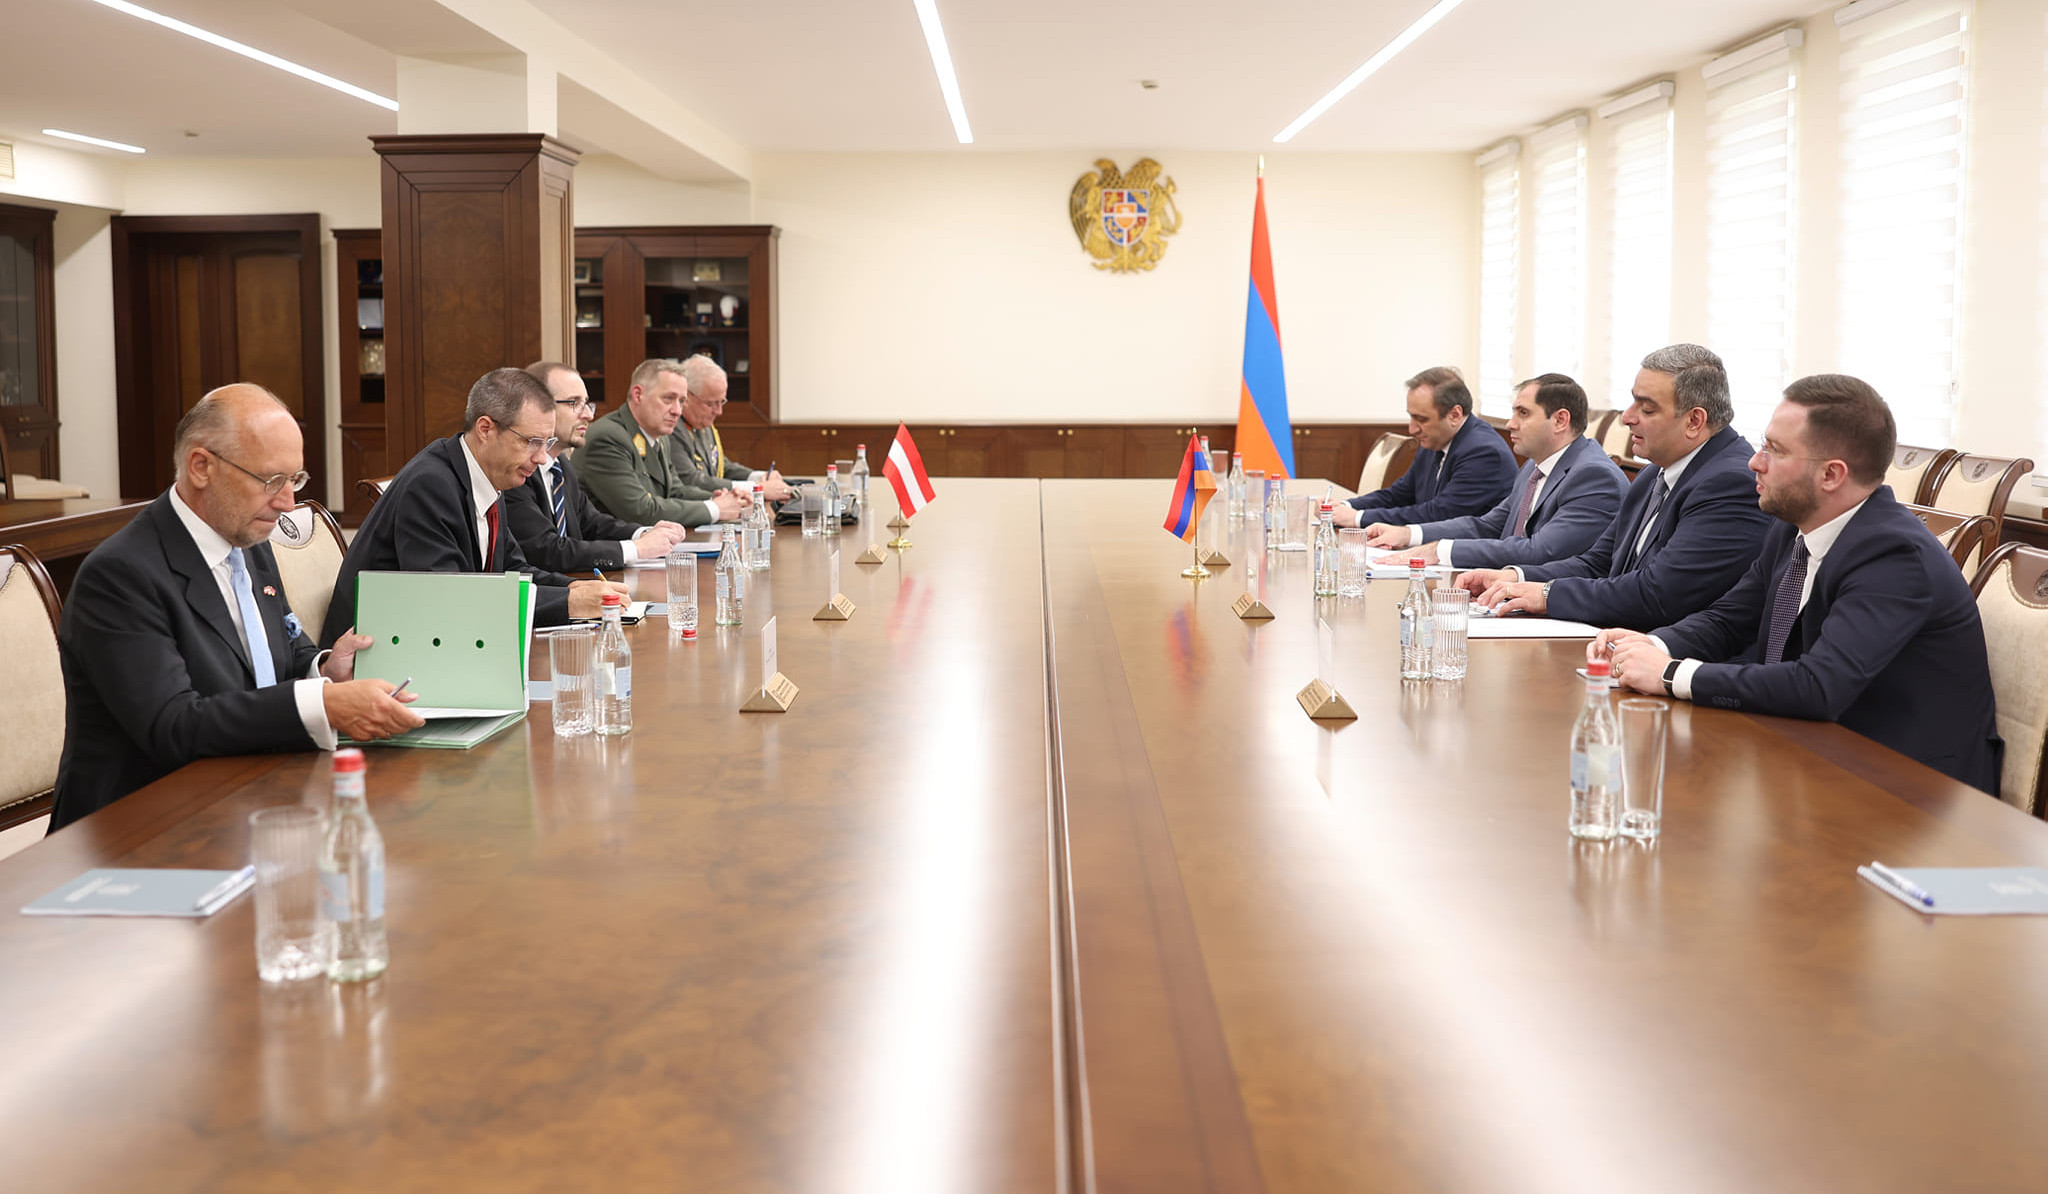 Papikyan and Austrian Defence Ministry Secretary General Kammel discuss cooperation between Armenia and Austria in defence